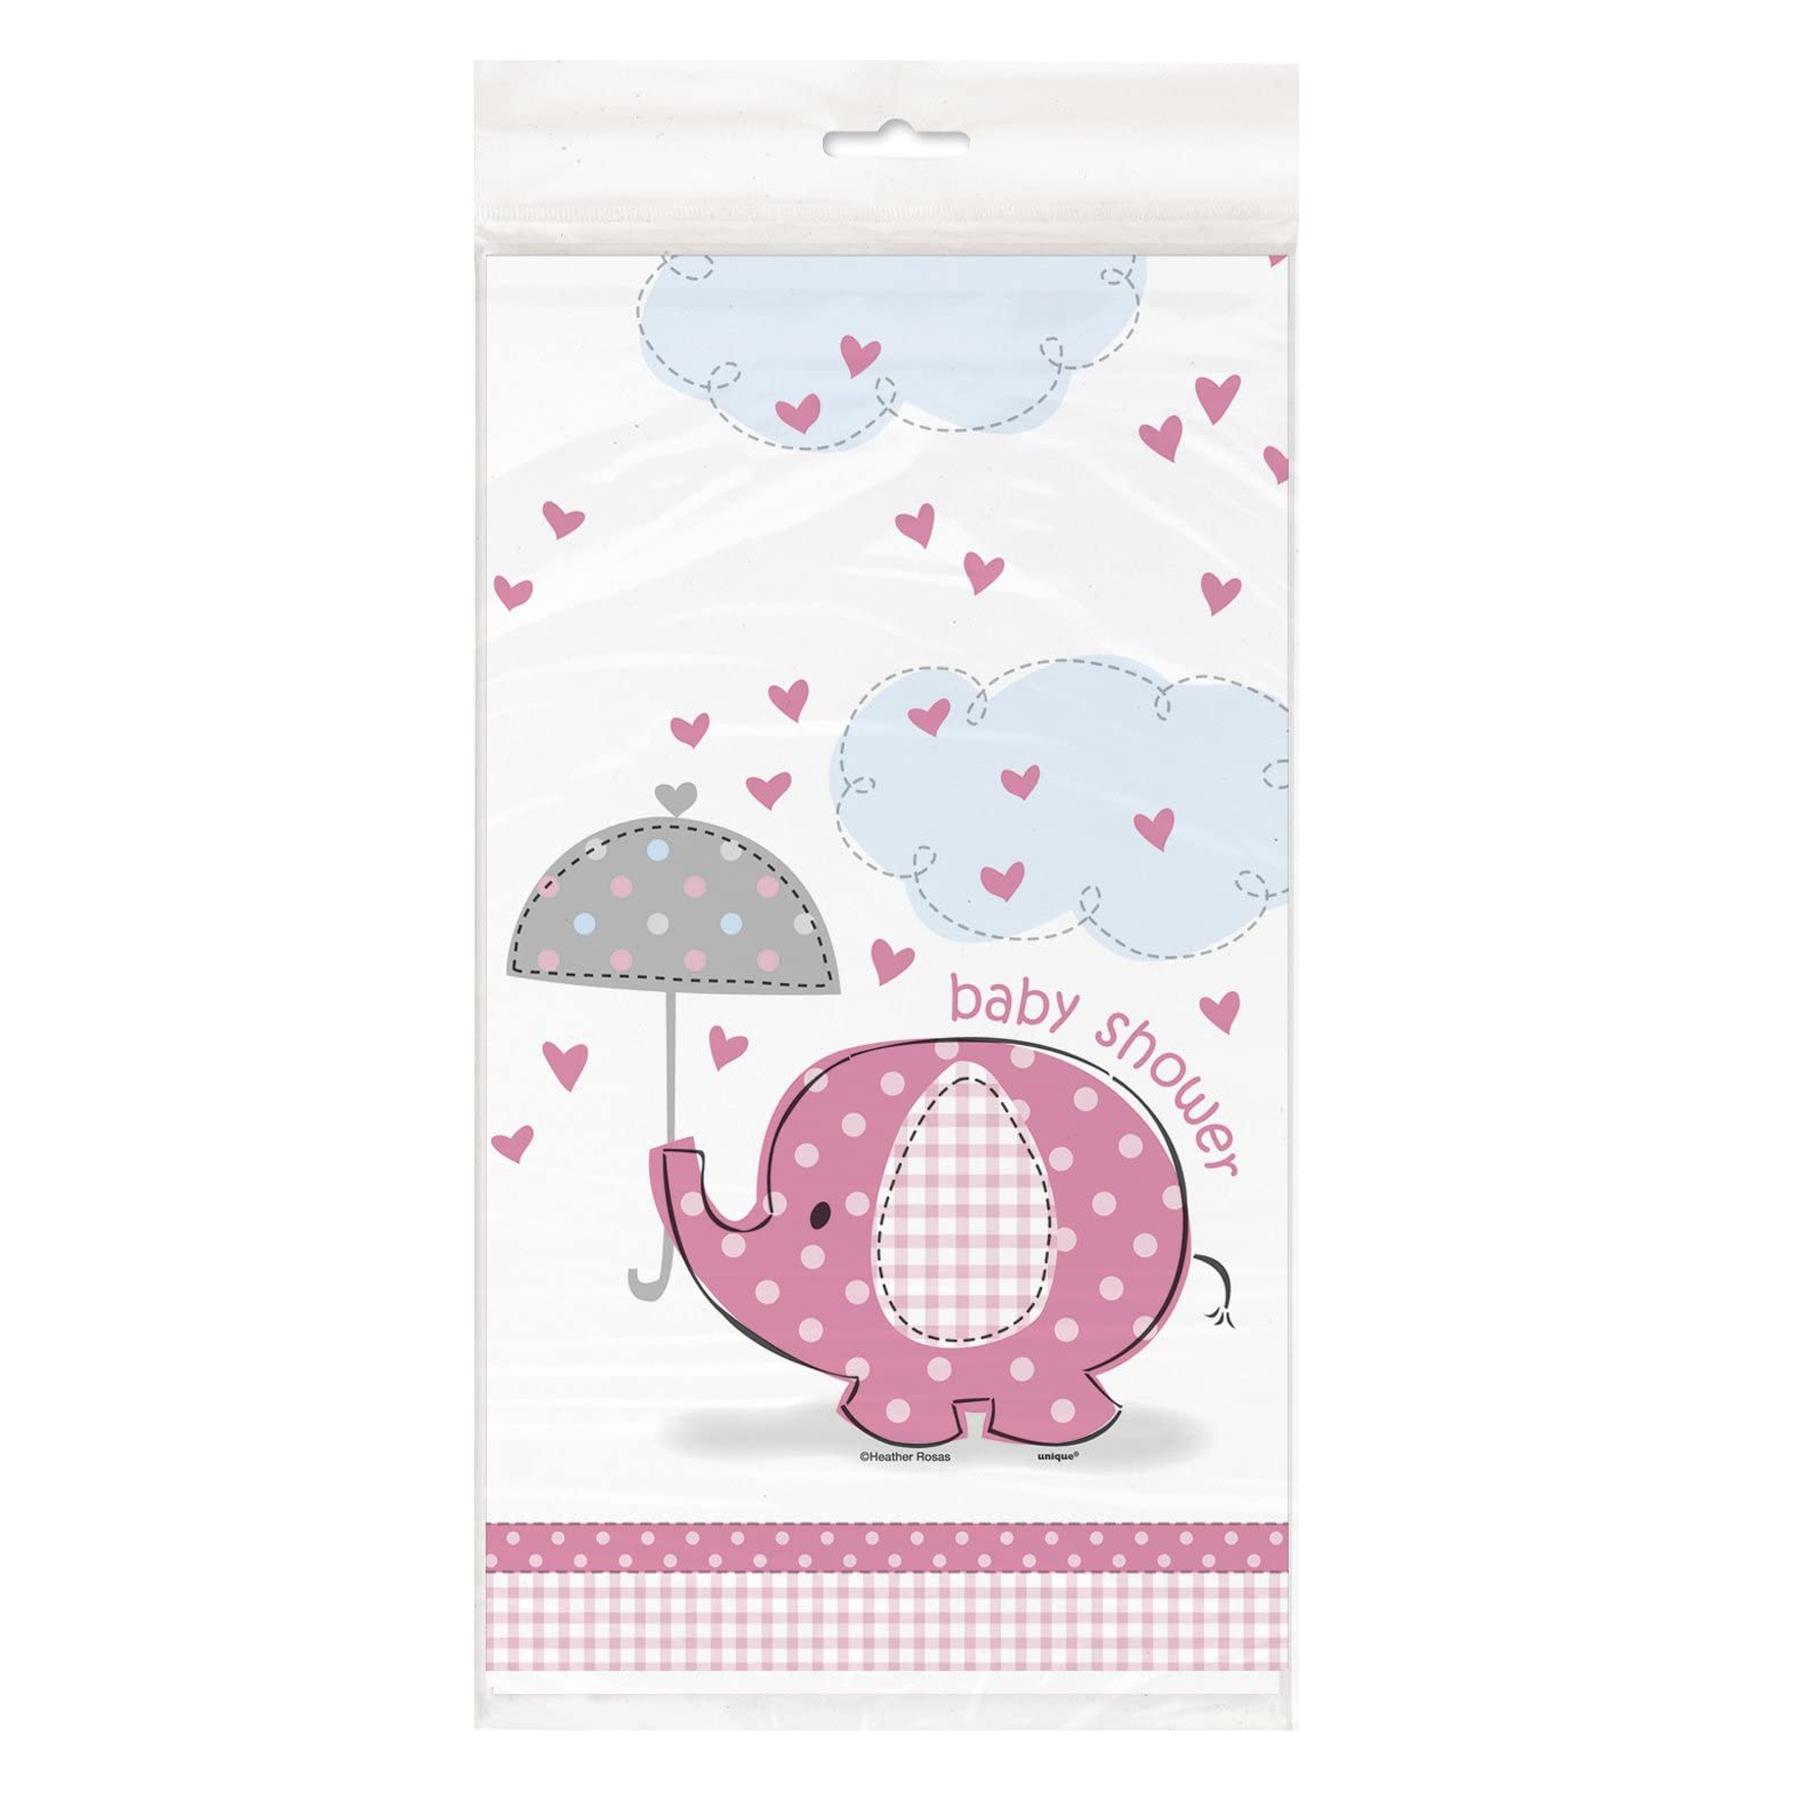 Baby Shower Plastic Table Cover Tablecloth 54x84 - Pink Elephant